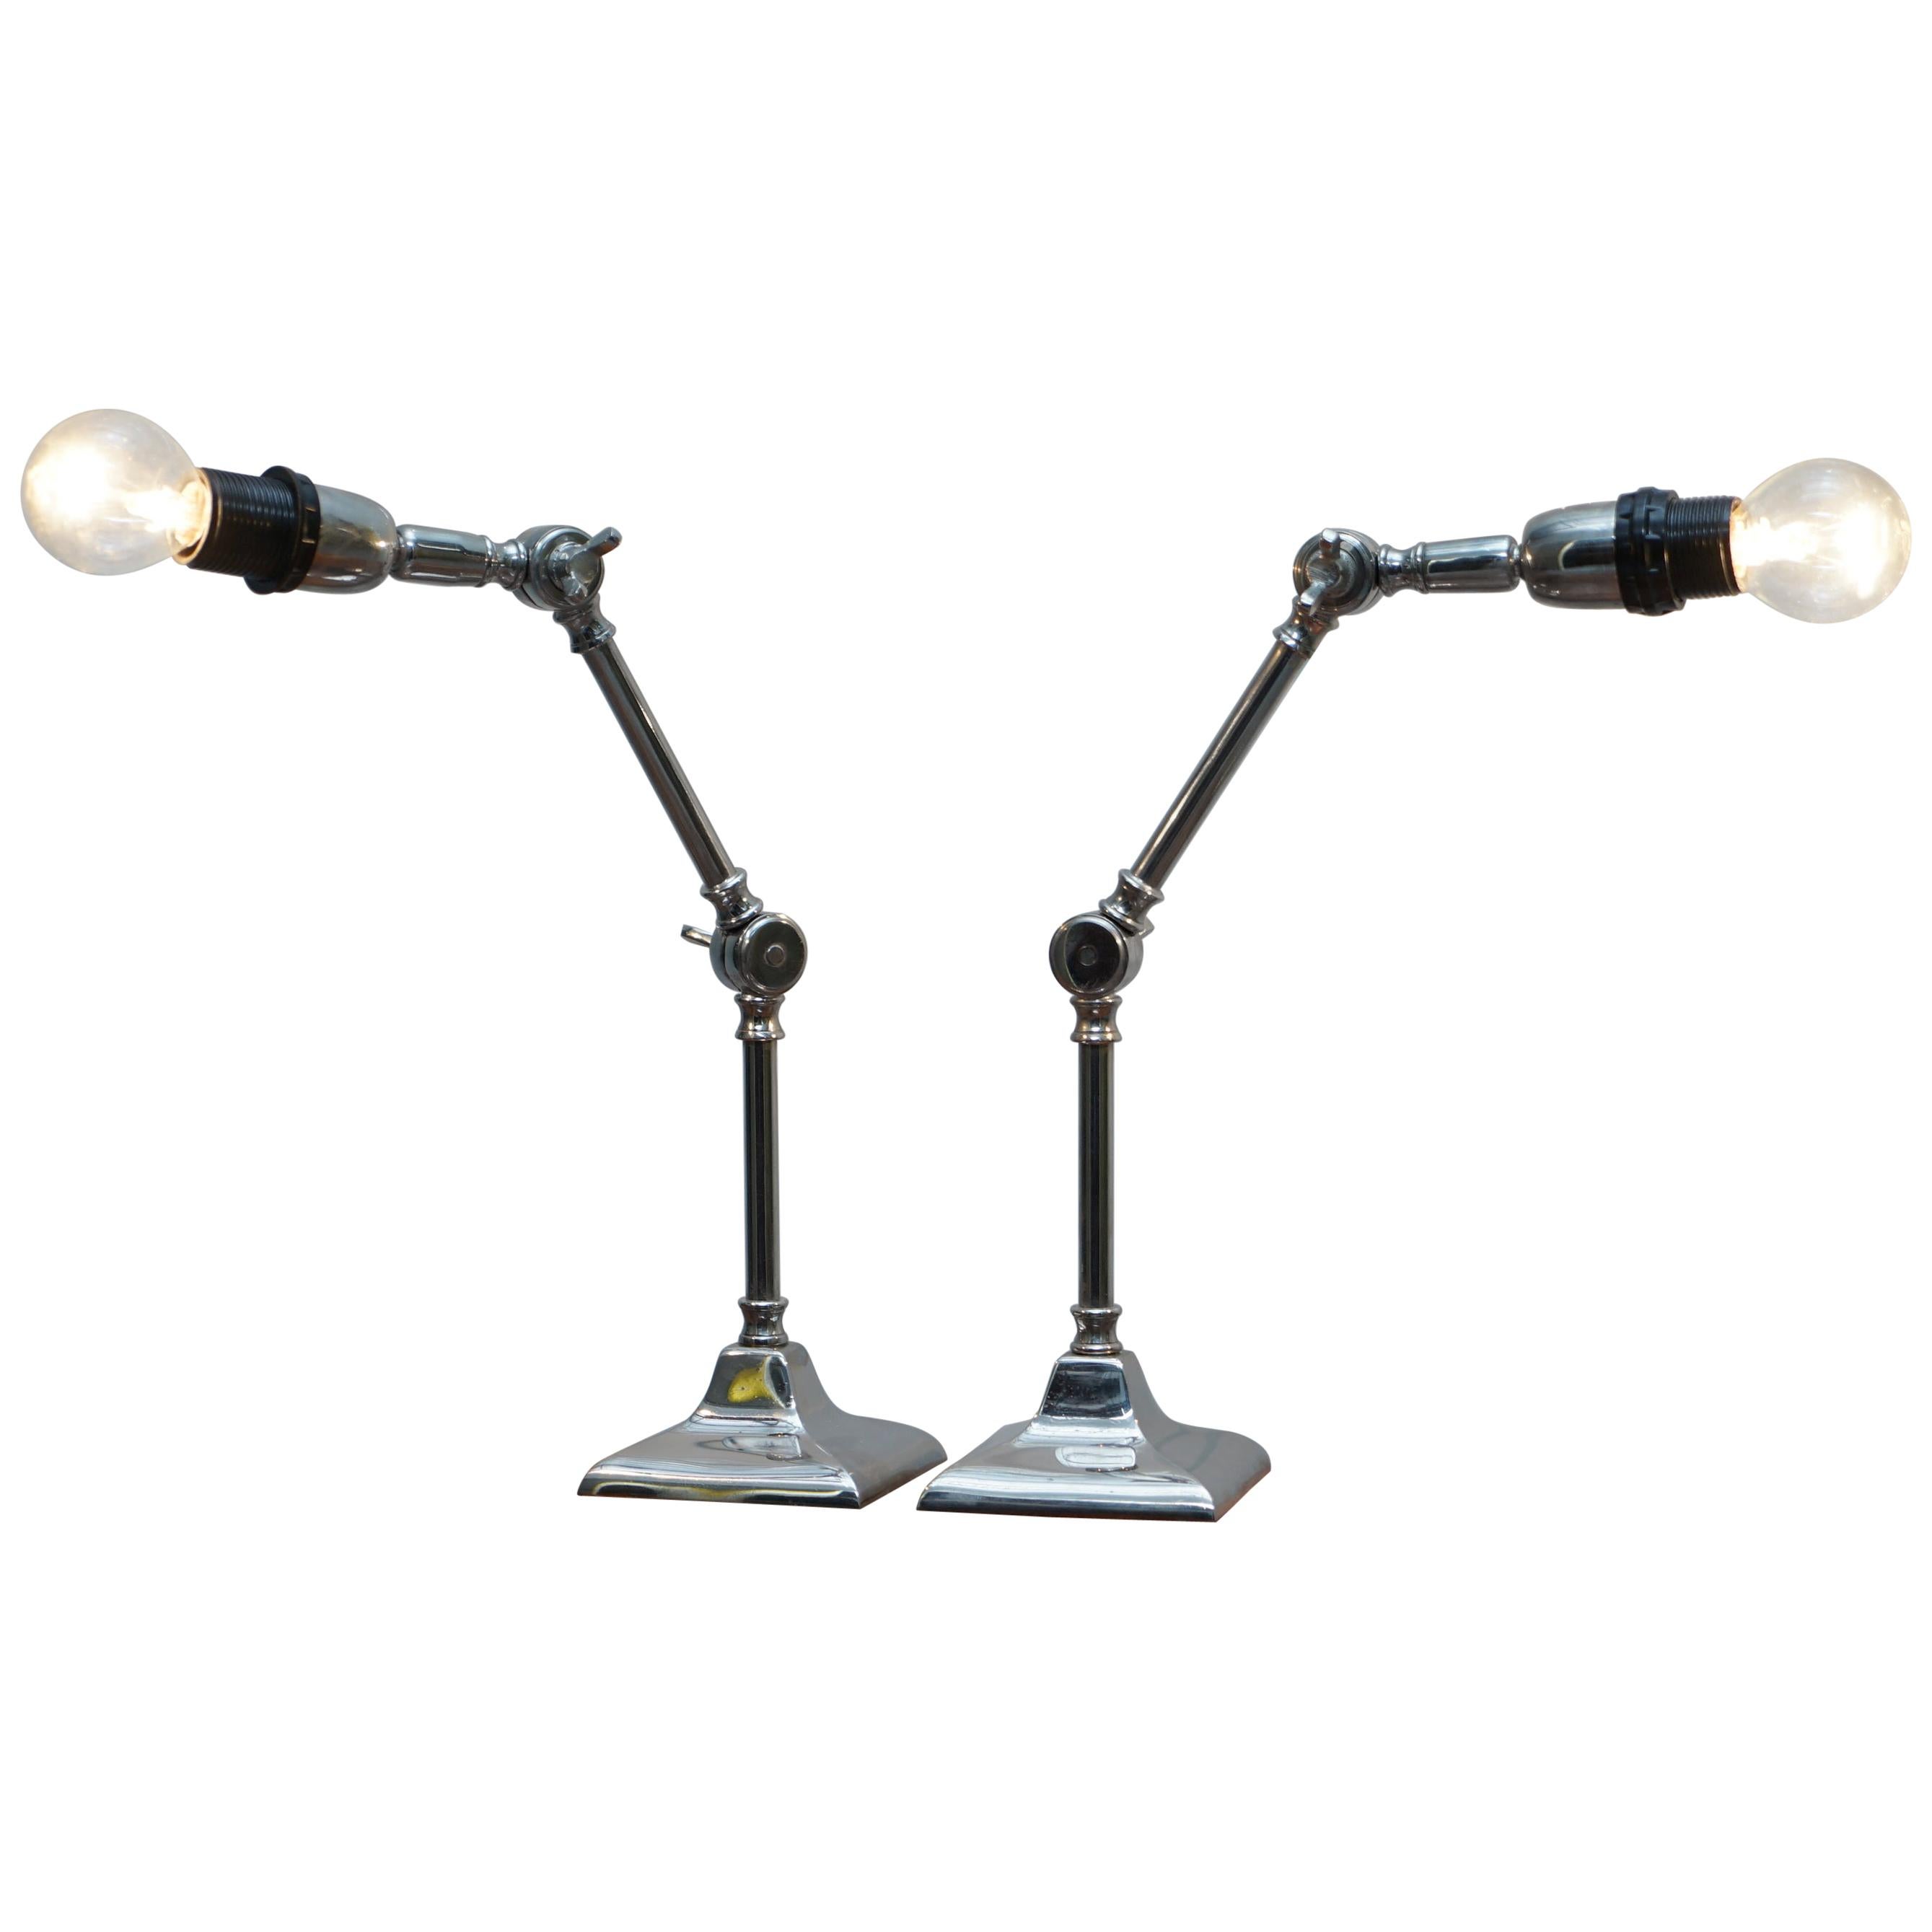 Pair of Small Solid Polished Metal Table Lamps with Two Points of Articulation